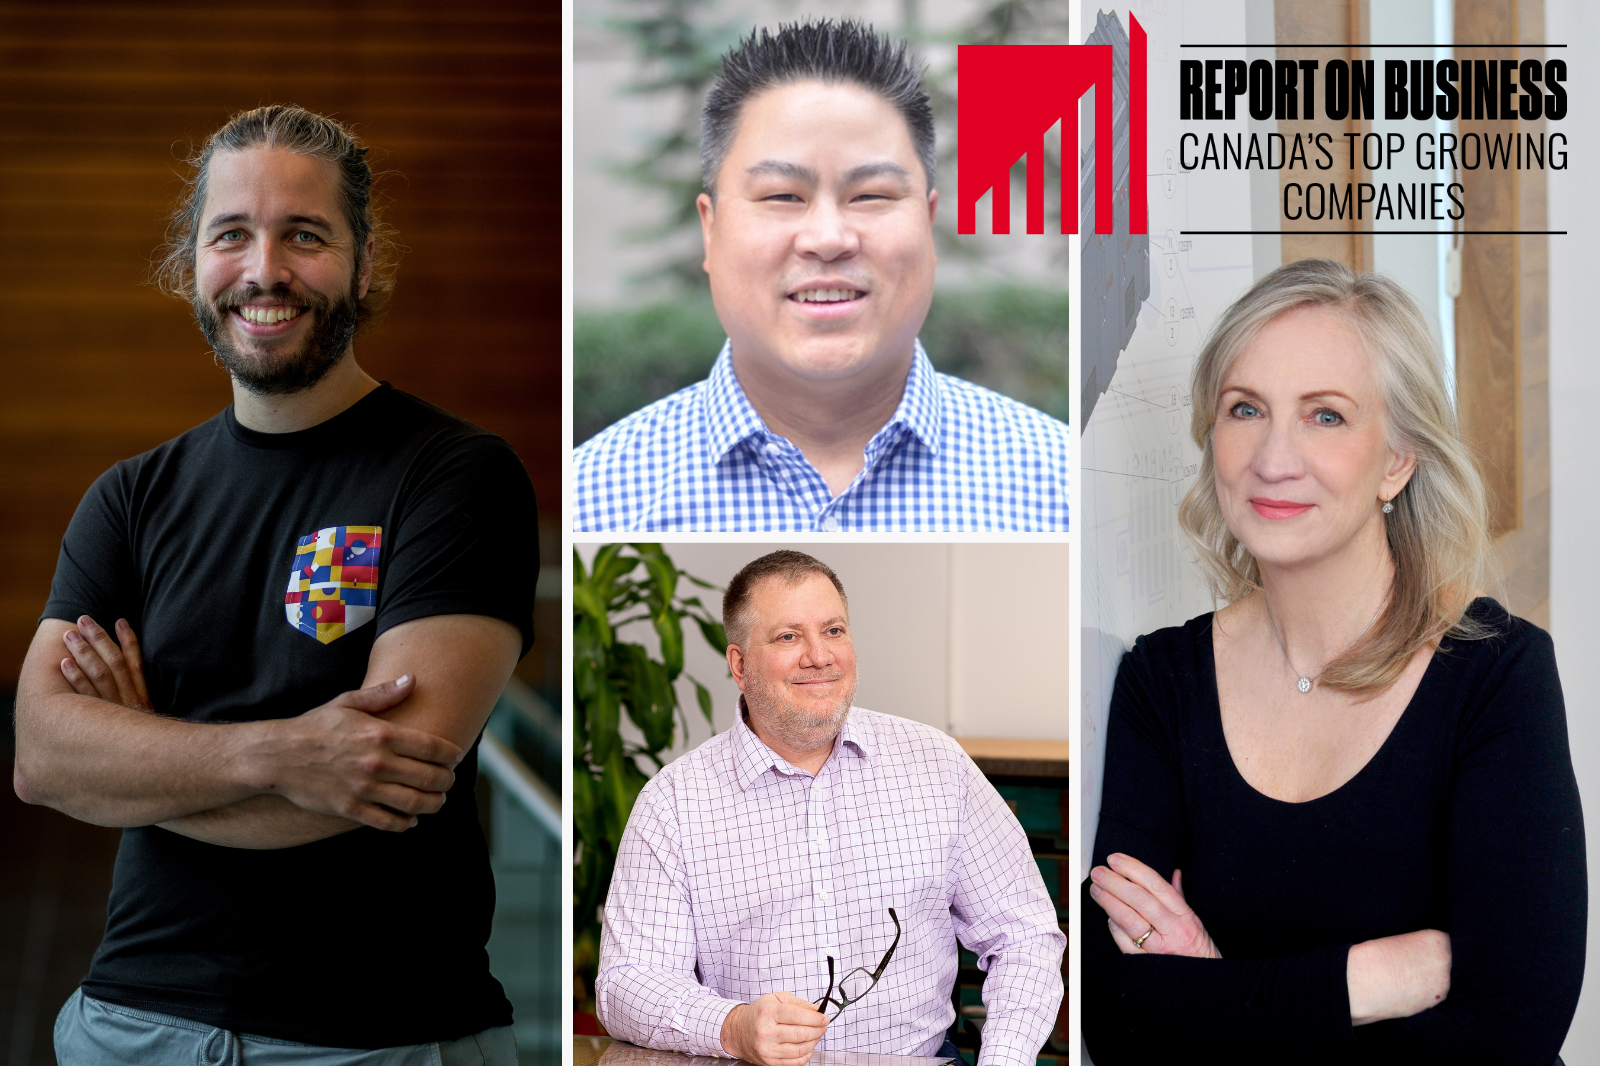 Collage of some TEC members who made the list of Canada's top growing companies from the Globe and Mail: Kevin Lim of Lim Geomatics, Lesley Gouldie of Thornhill Medical. Vincent Routhier of Lu Interactive Playgrounds, and Benoît Lemieux of Creos